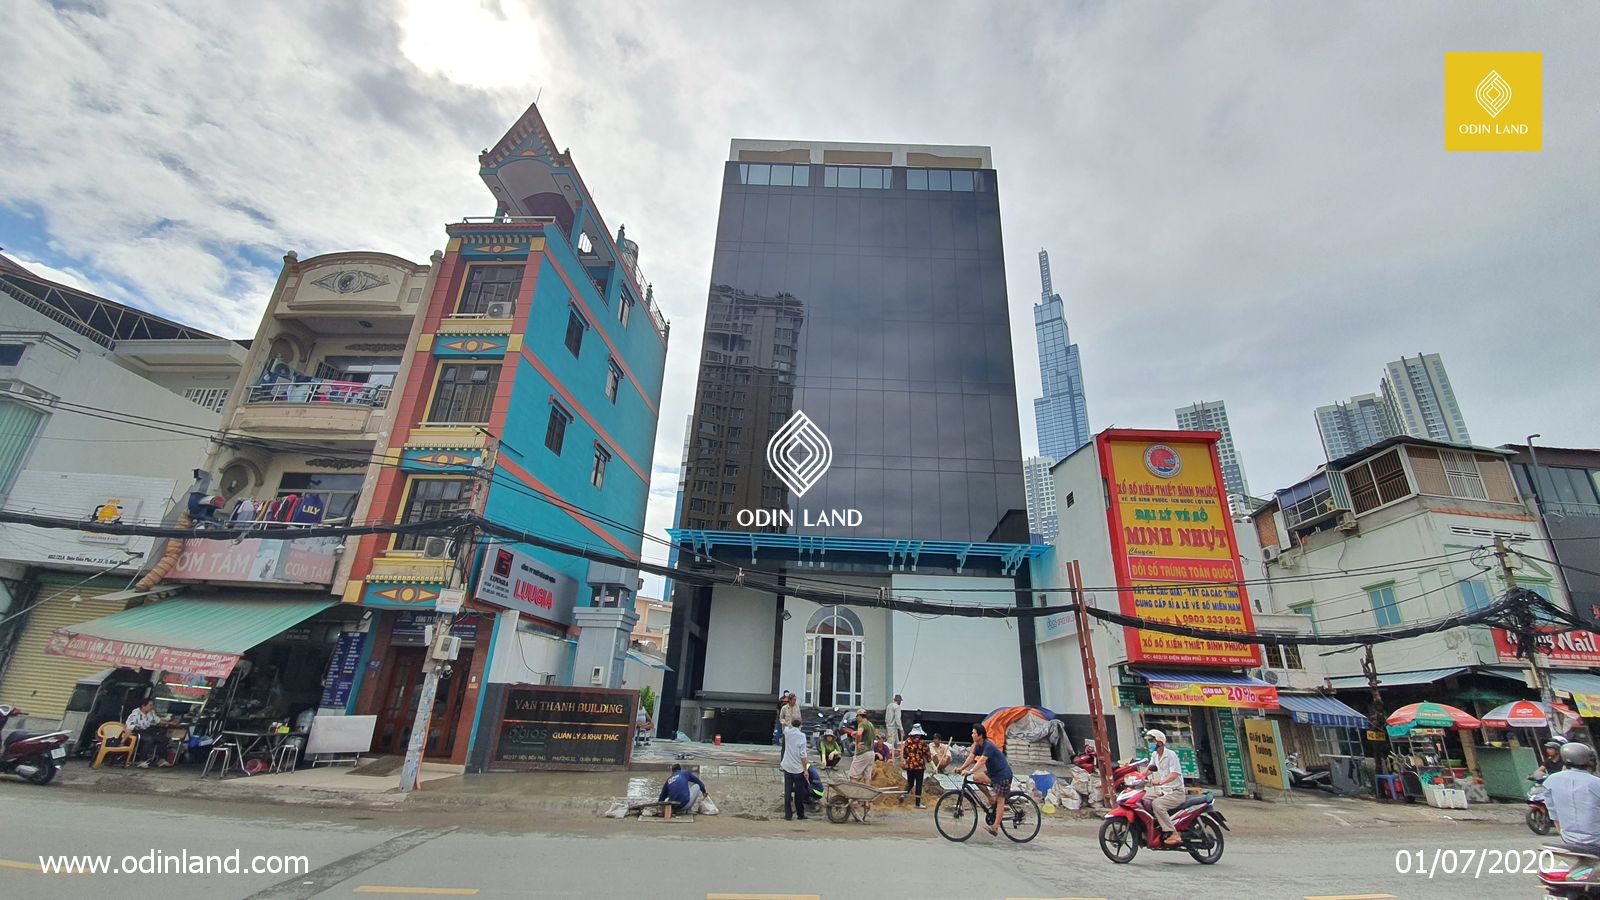 Office for lease at Van Thanh Building